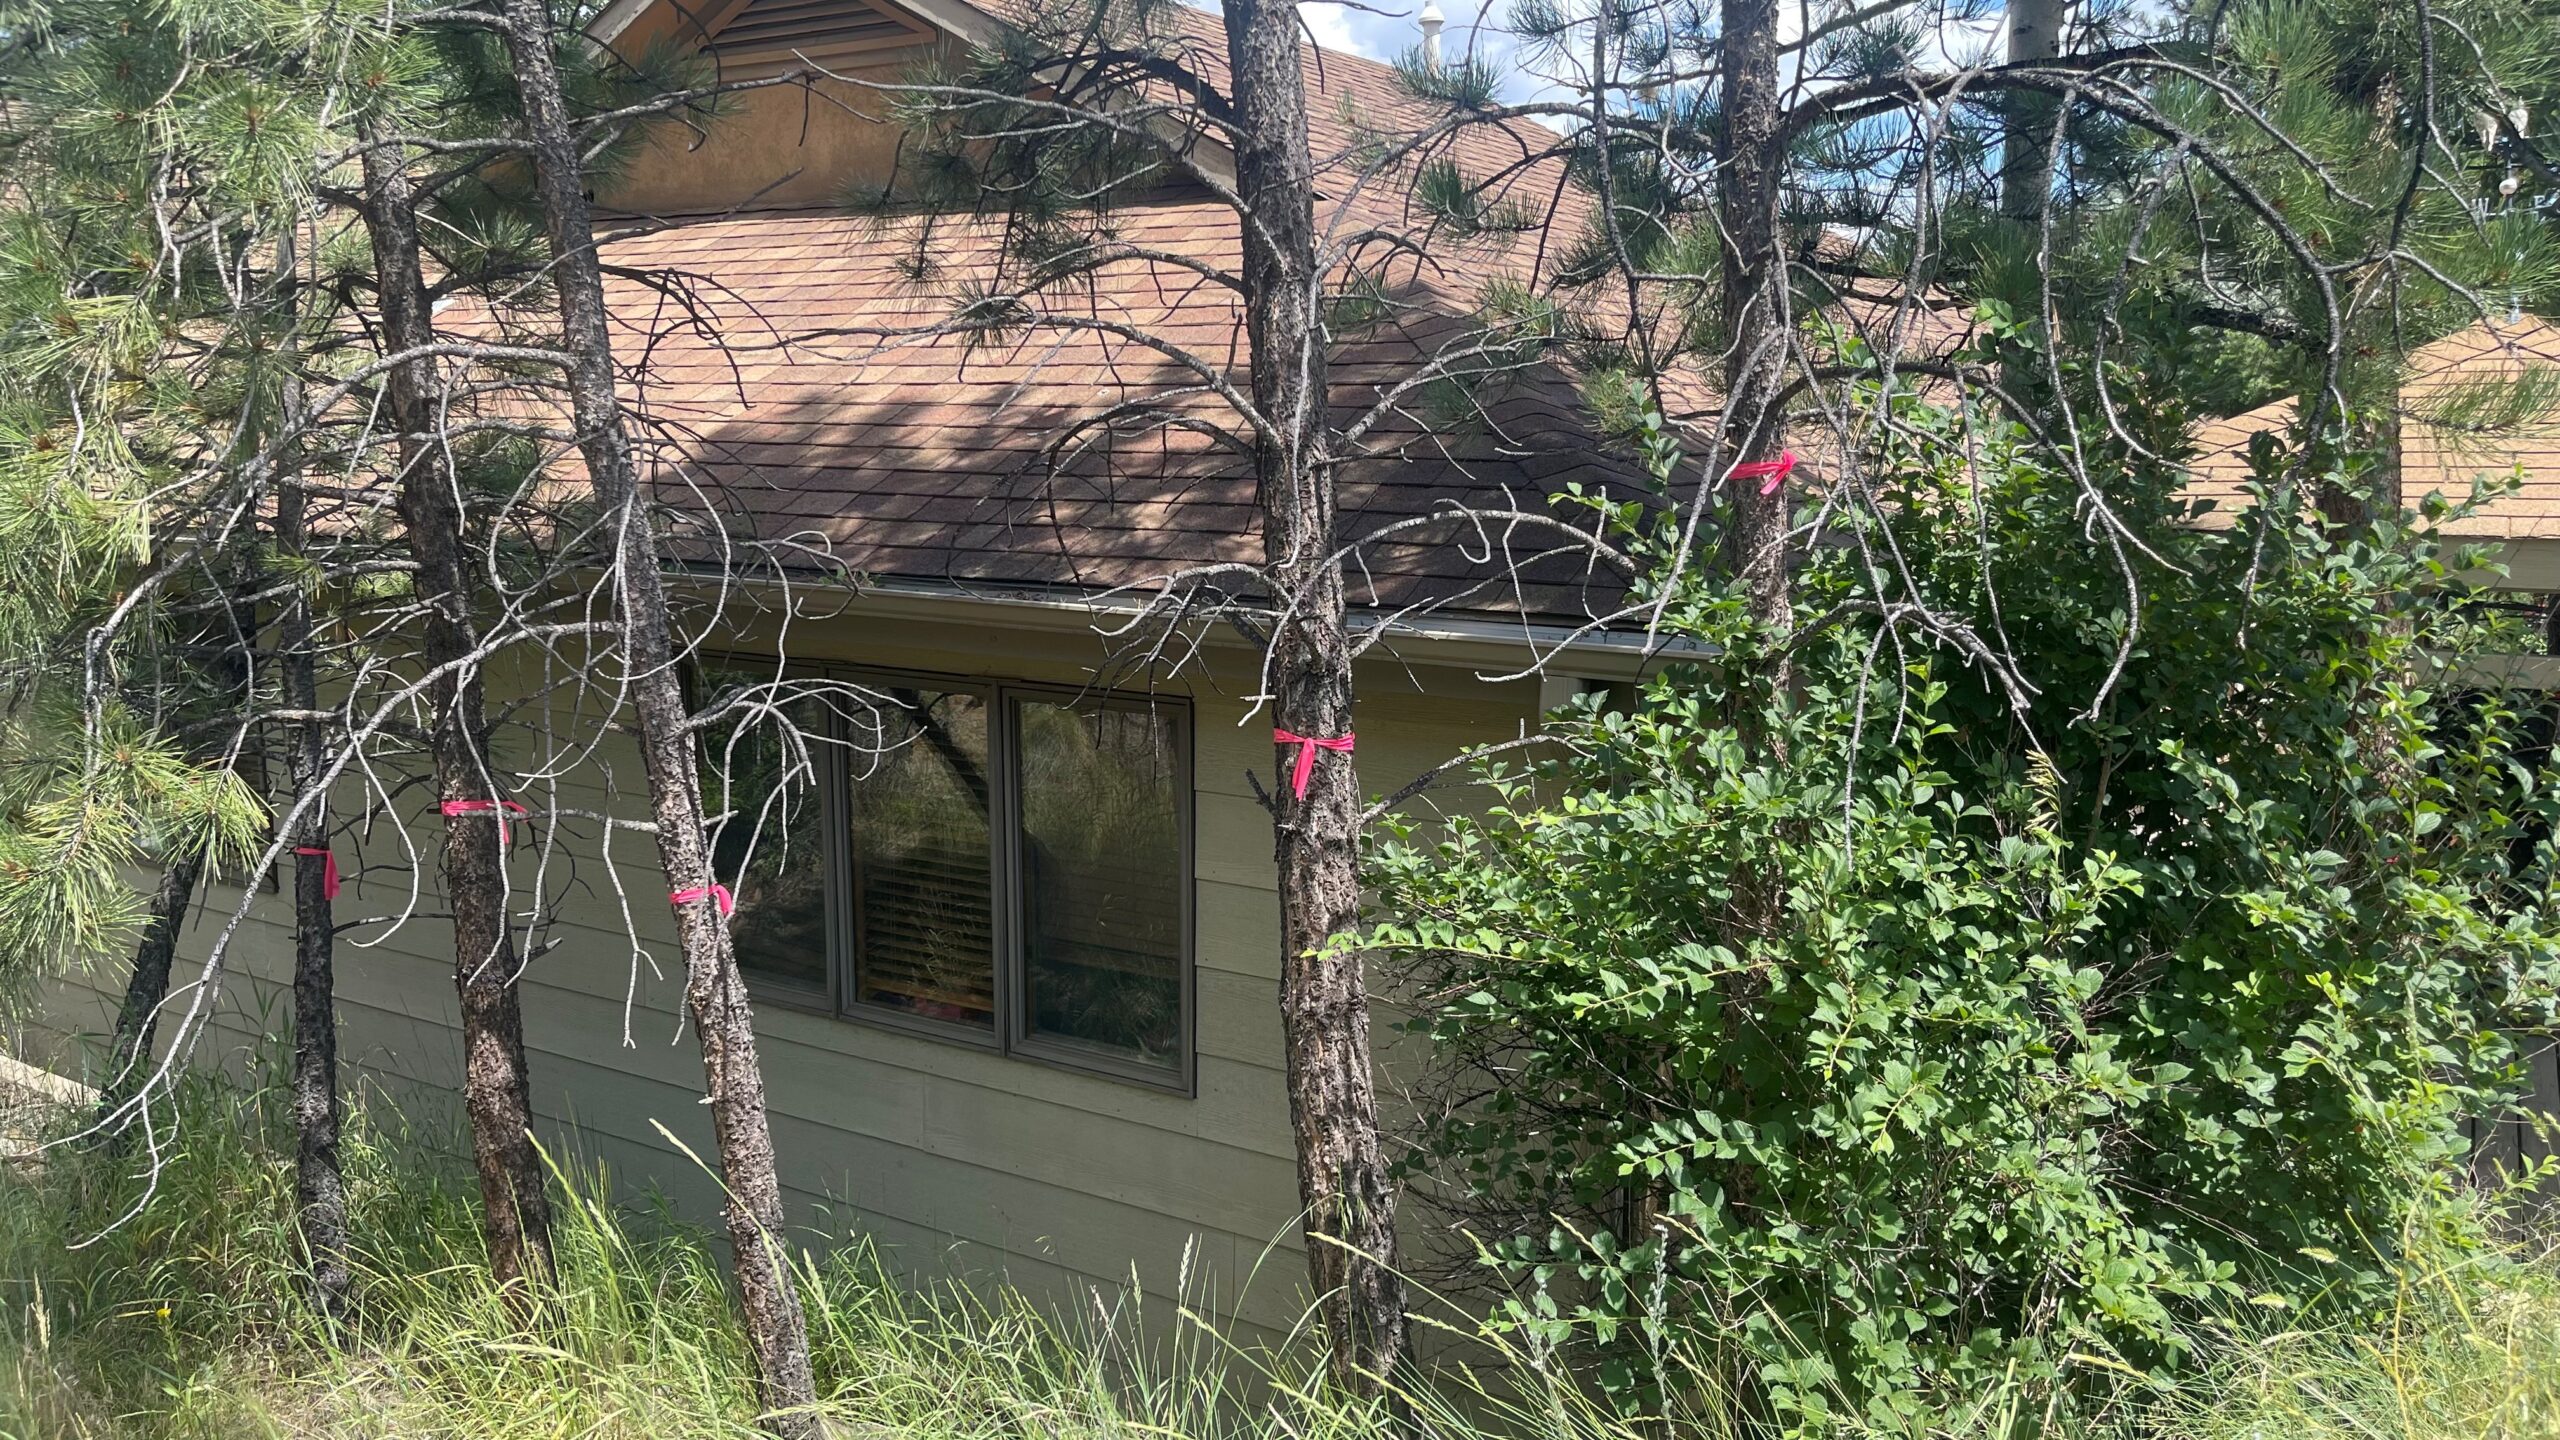 A house with a brown roof is partially obscured by several thin trees with pink ribbons tied around them, surrounded by tall grass and foliage.